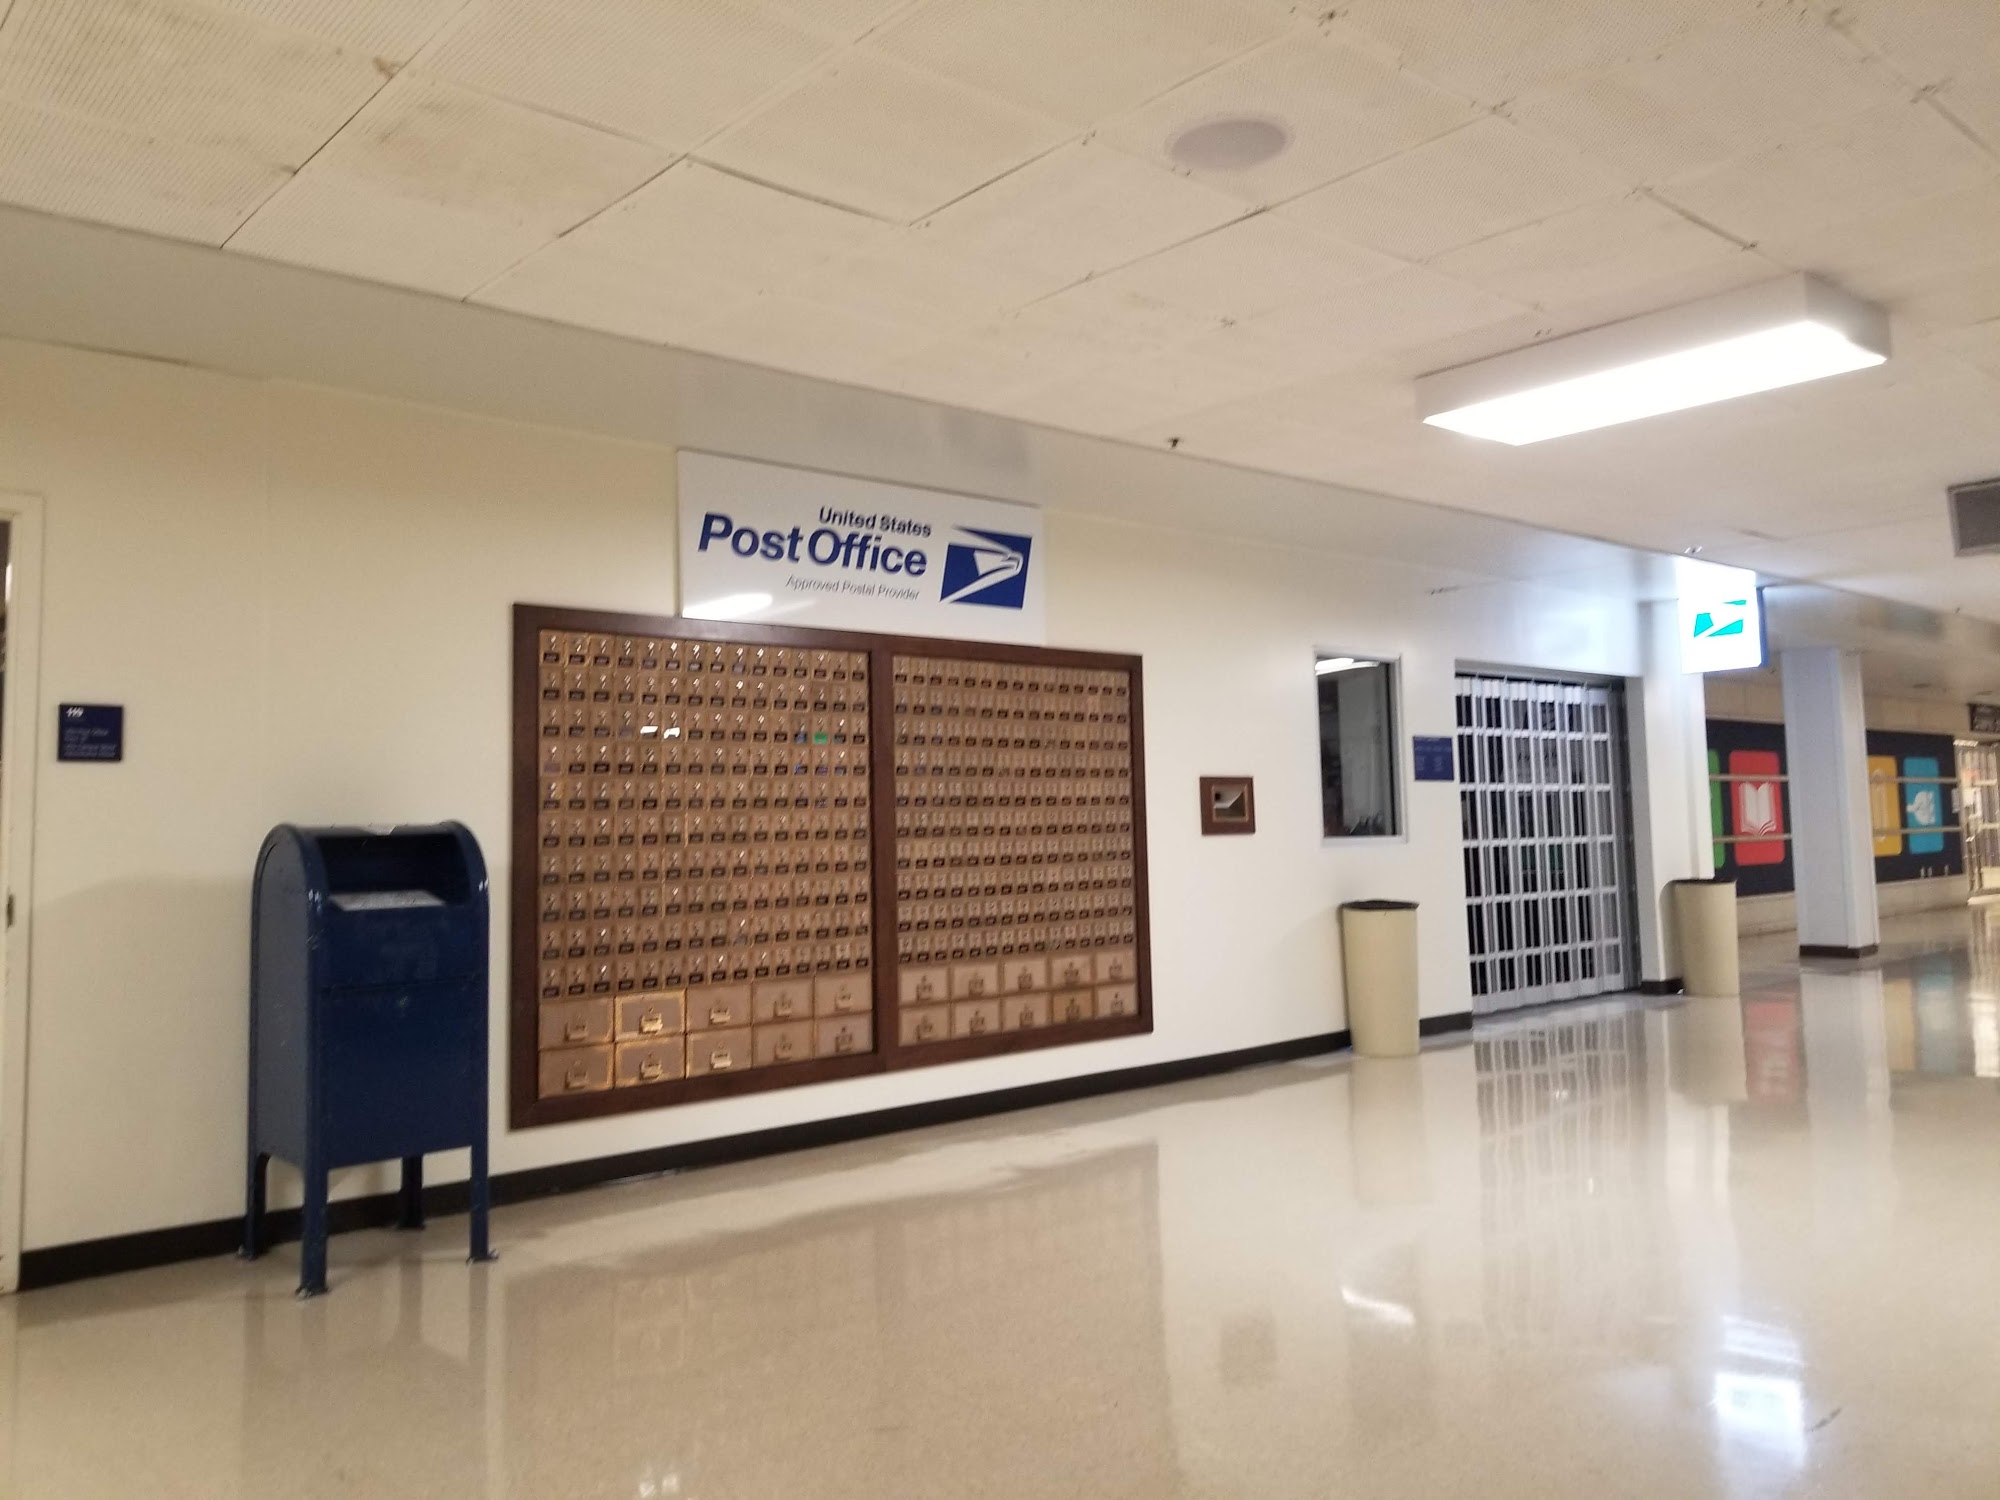 The Student Center Post Office